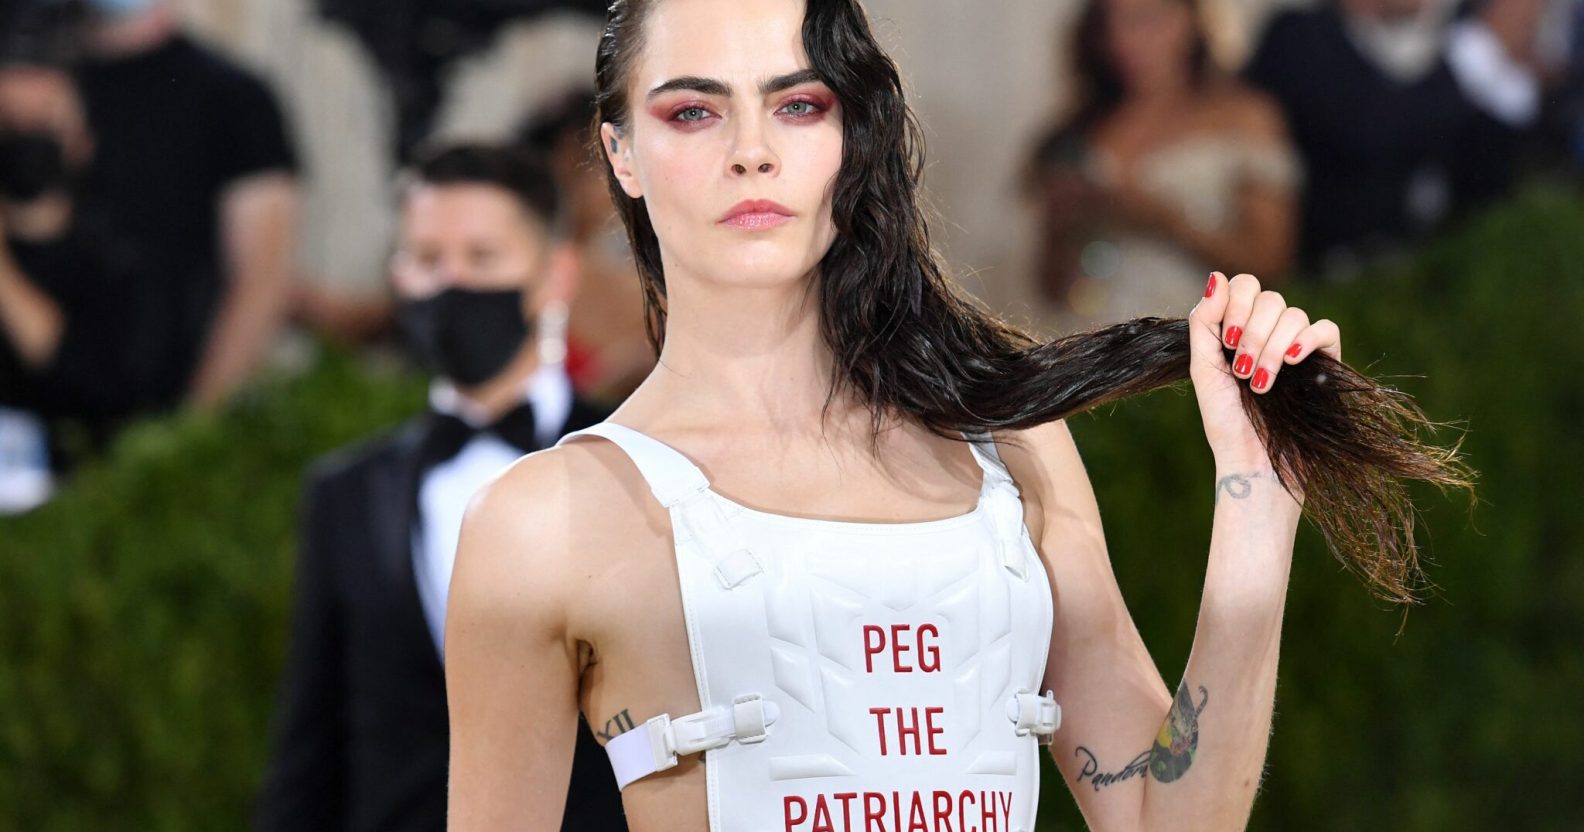 Luna Matatas trademarked the phrase "Peg the Patriarchy" in 2015.